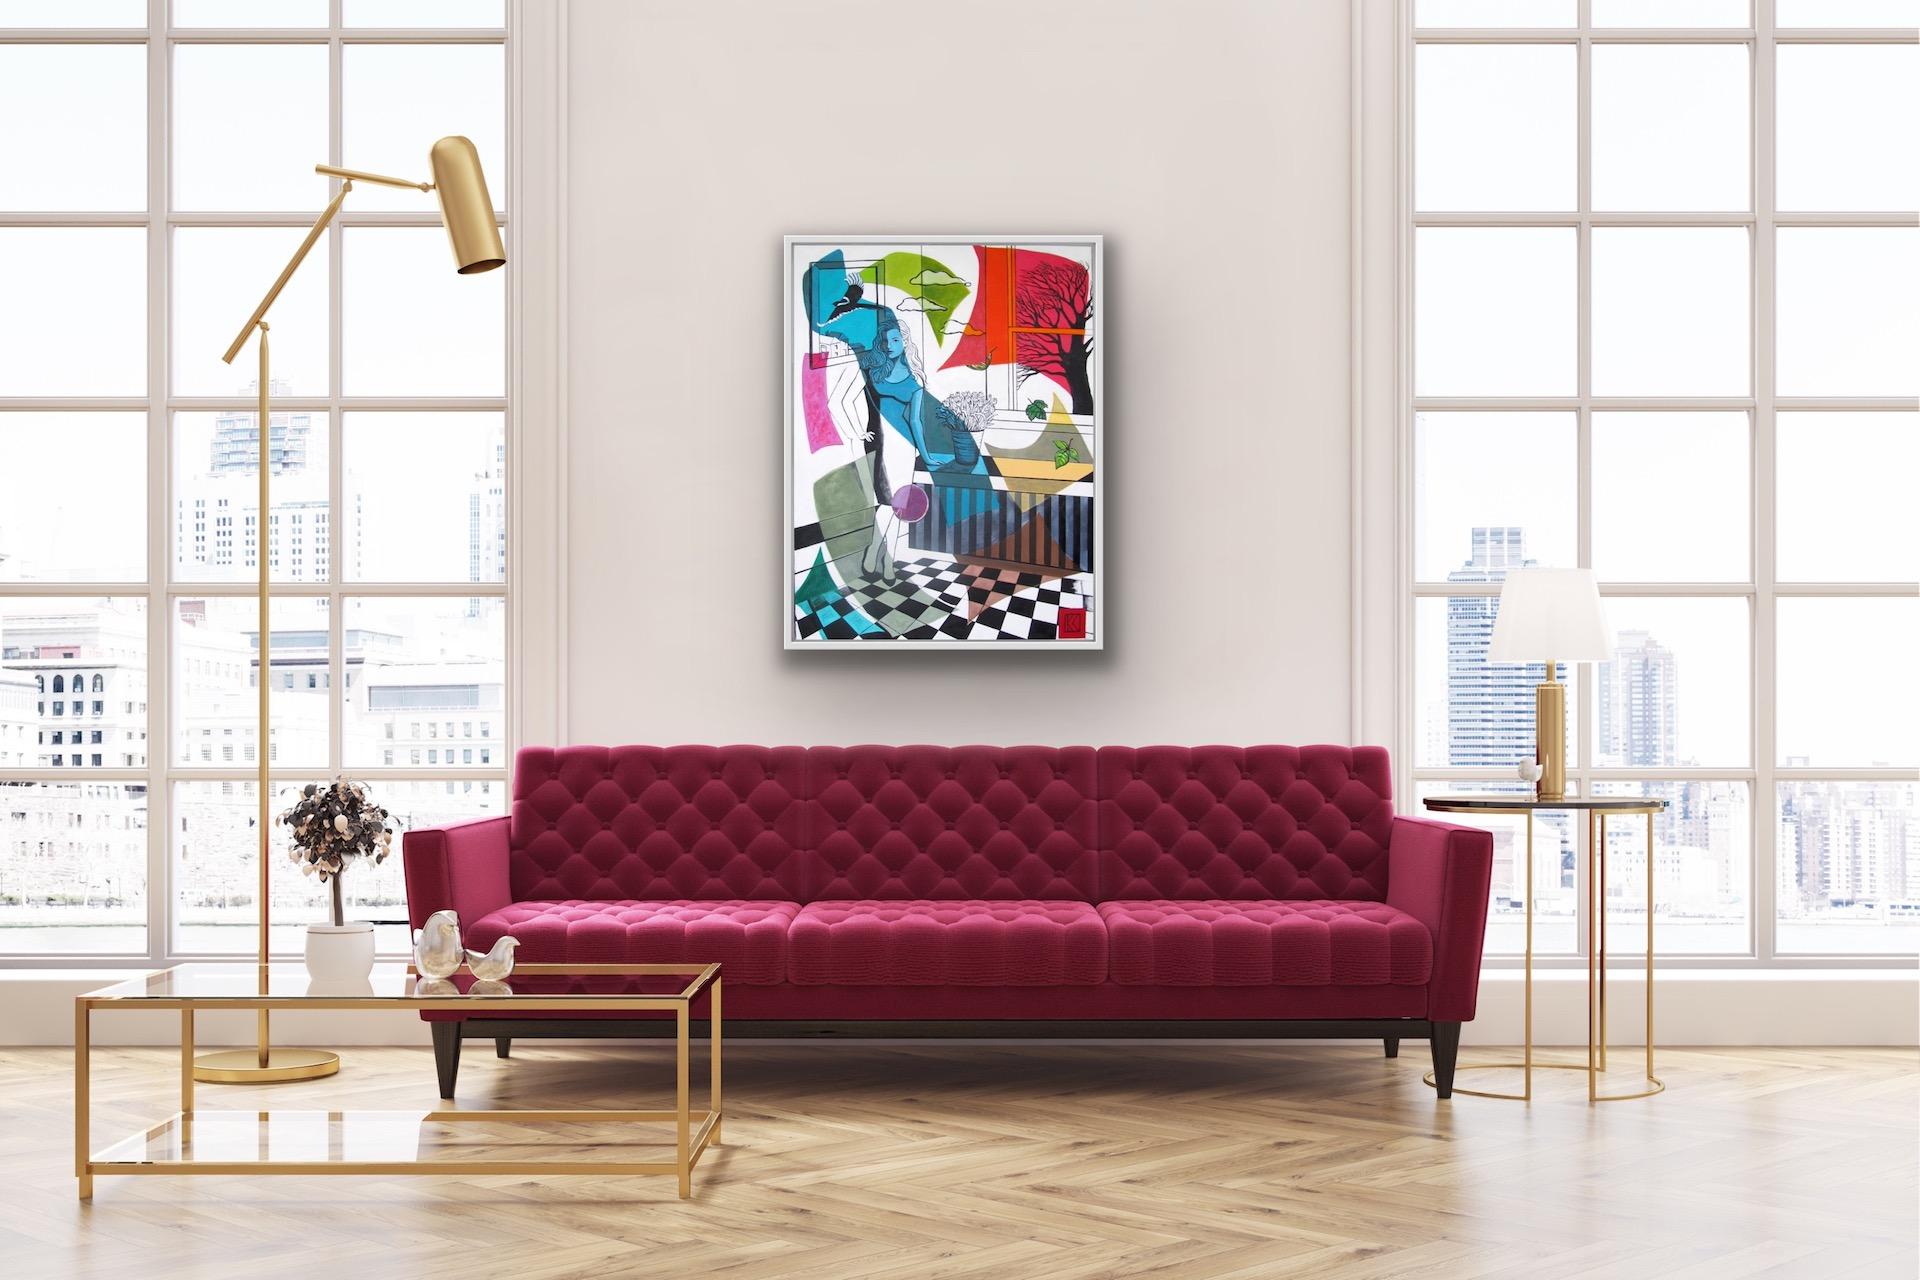 Karen Lynn
Blue Woman
Original Painting
Oil on Canvas
Canvas Size: H 100cm x W 76cm
(Please note that in situ images are purely an indication of how a piece may look).

This painting of a woman in a pop art style has always been one of my favorite